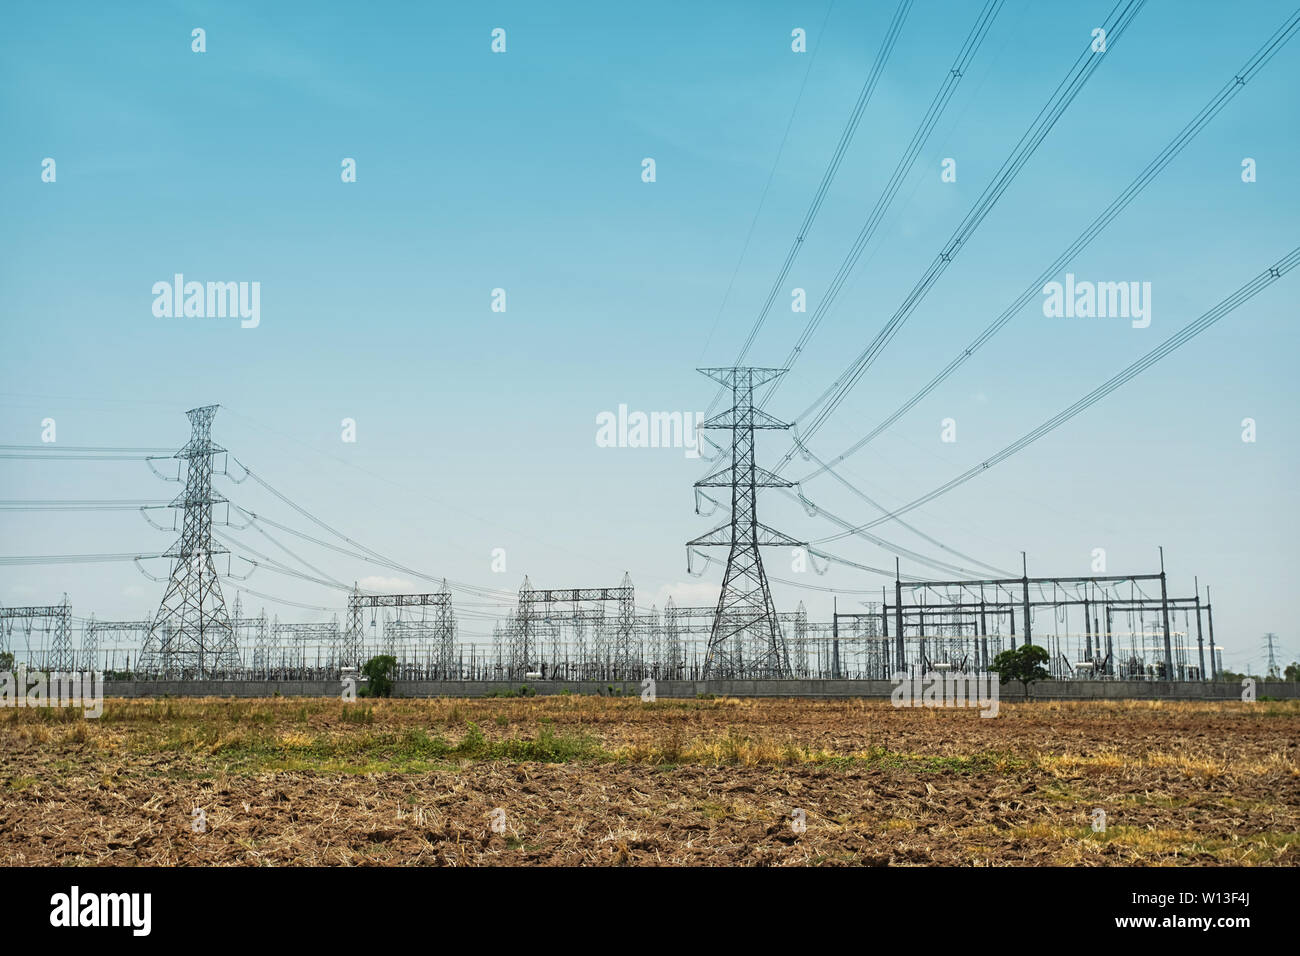 Power transmission, Electric power lines and power plant background. Stock Photo